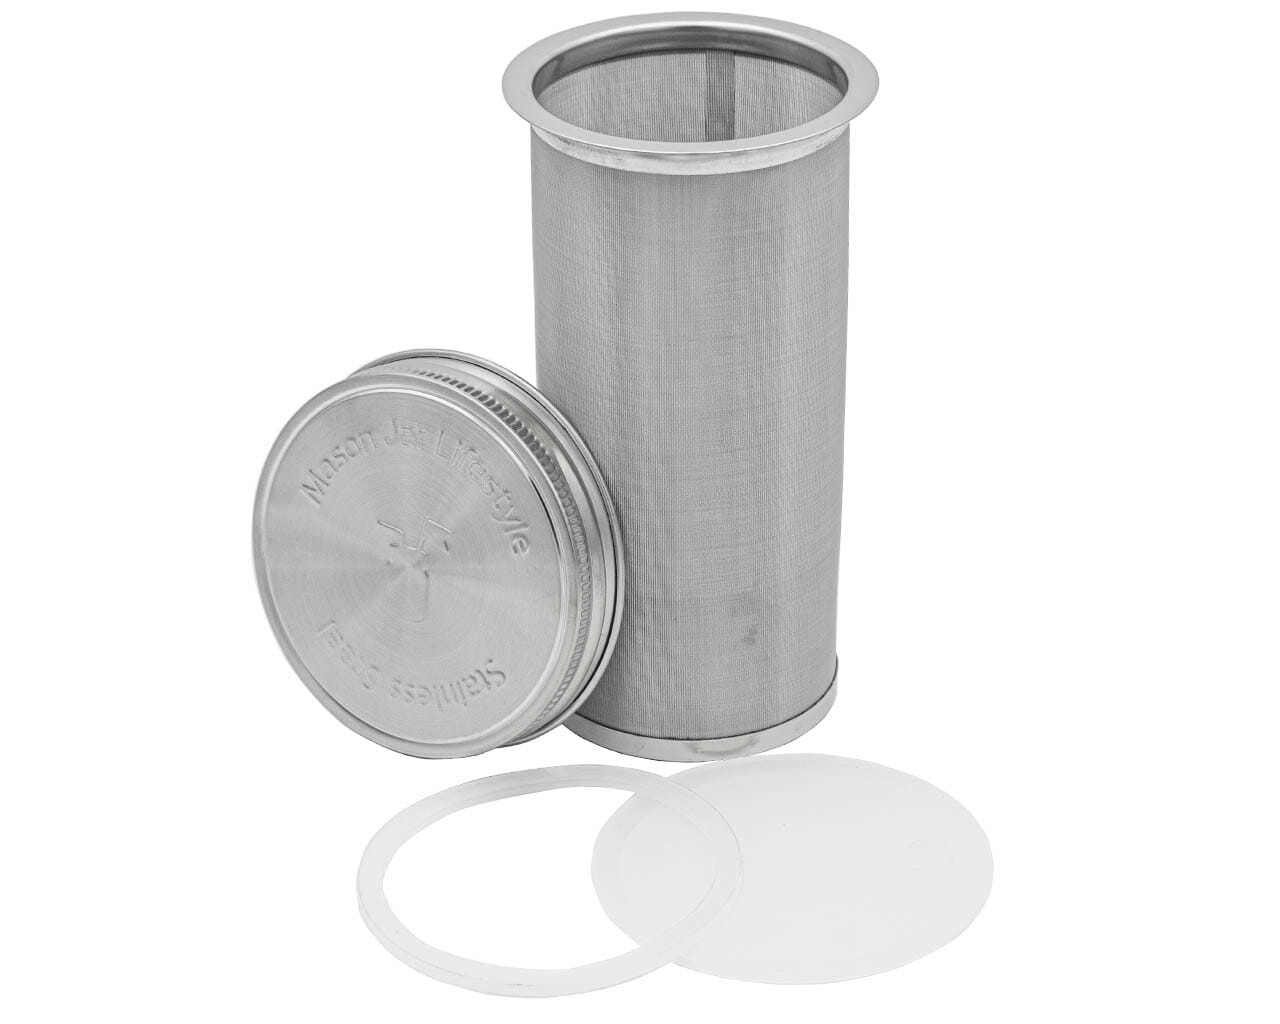 9 Stainless Steel & Glass Tumblers - Center for Environmental Health